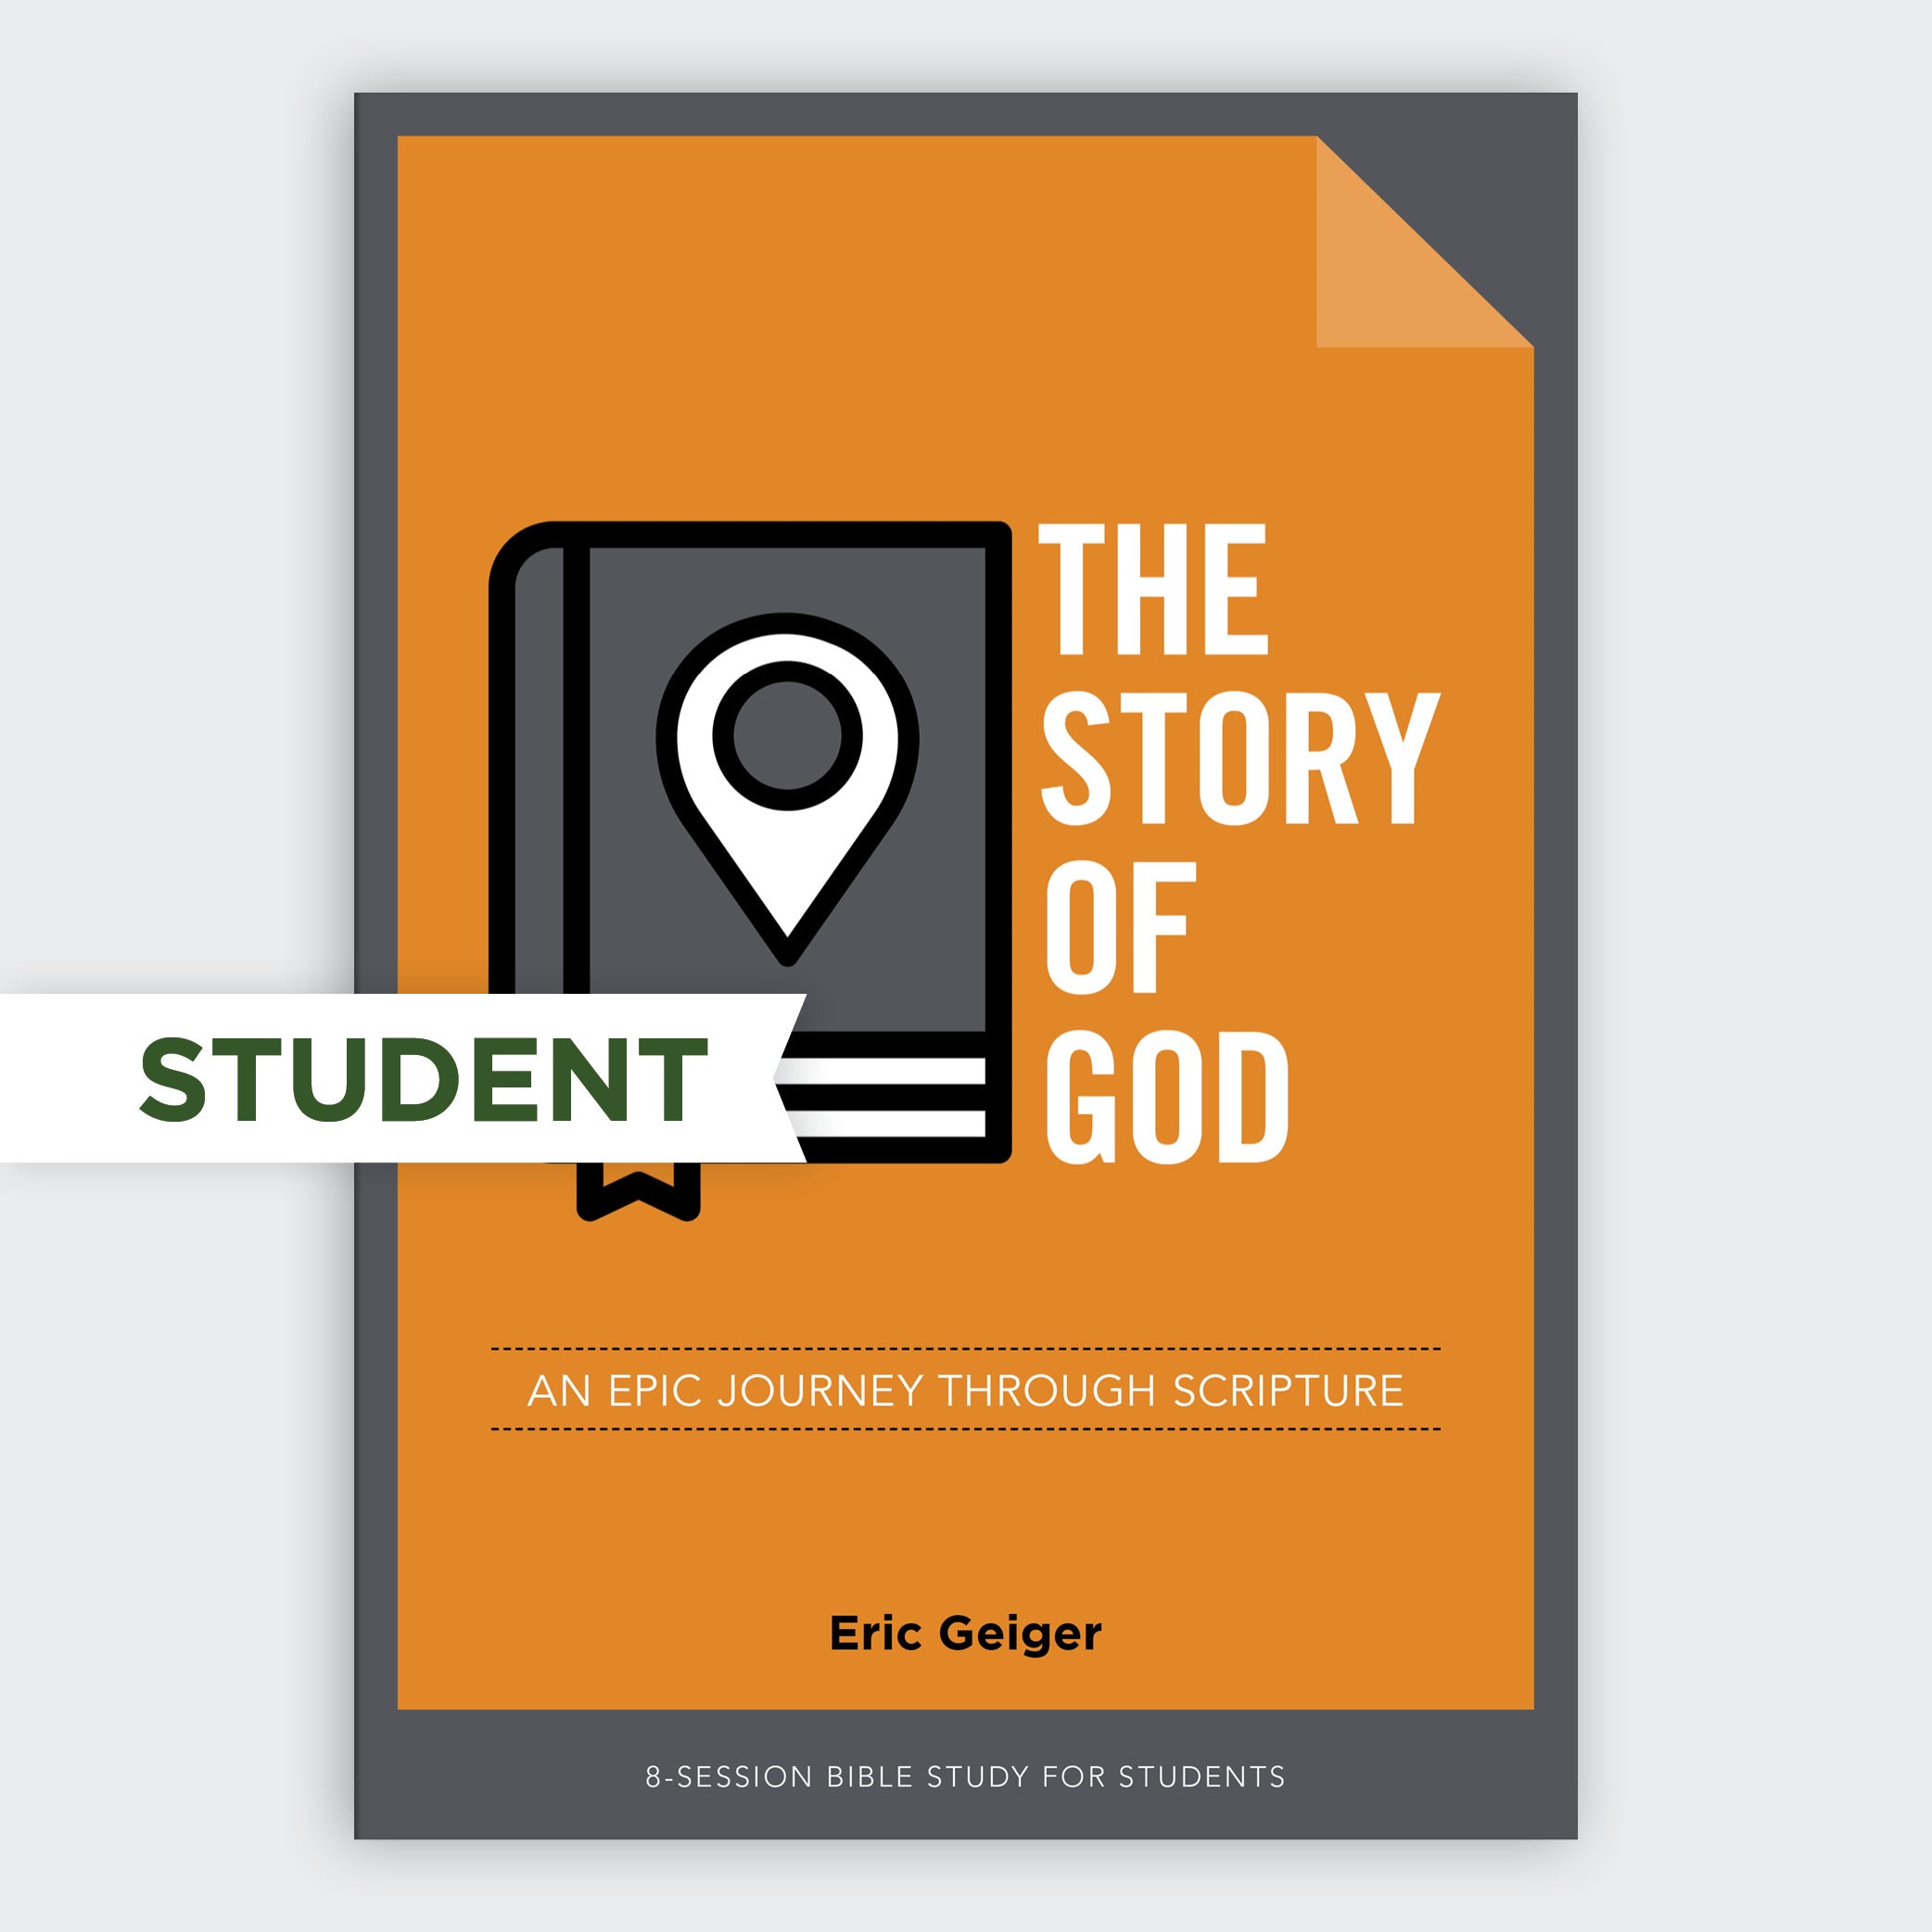 The Story of God - Student Workbook